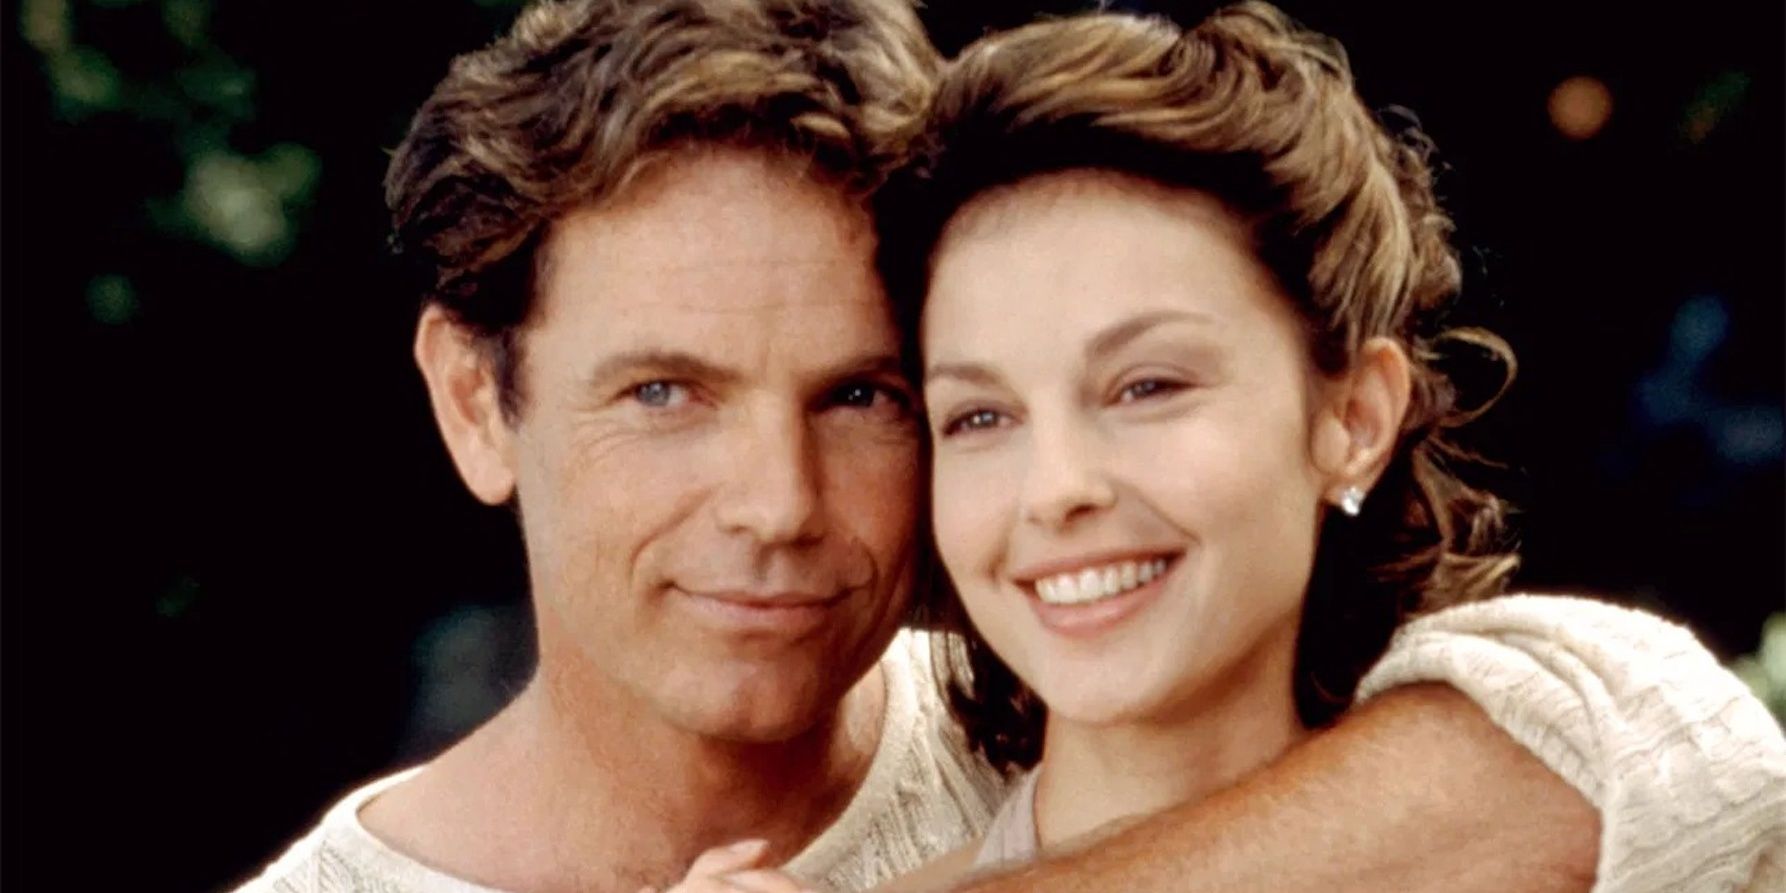 Bruce Greenwood with his arm around Ashley Judd in Double Jeopardy